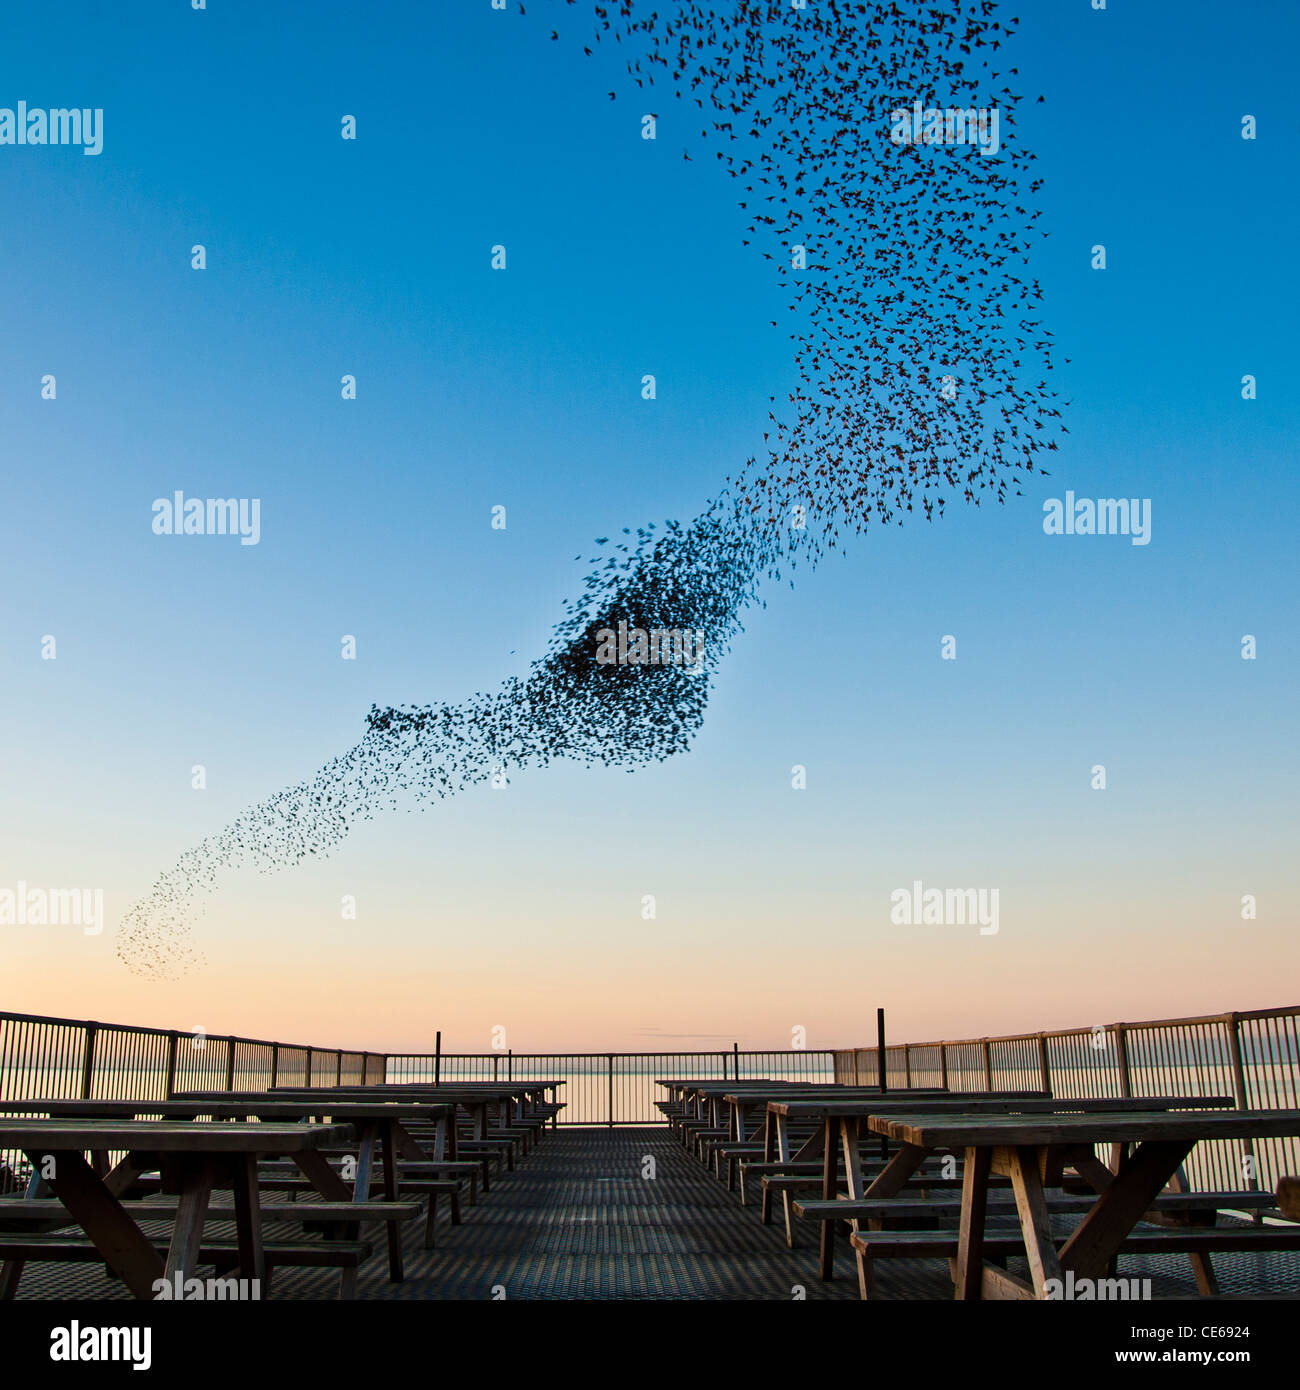 A murmuration (flock ) of starlings at sunset, making a shape pattern in the sky, Aberystwyth Wales UK Stock Photo